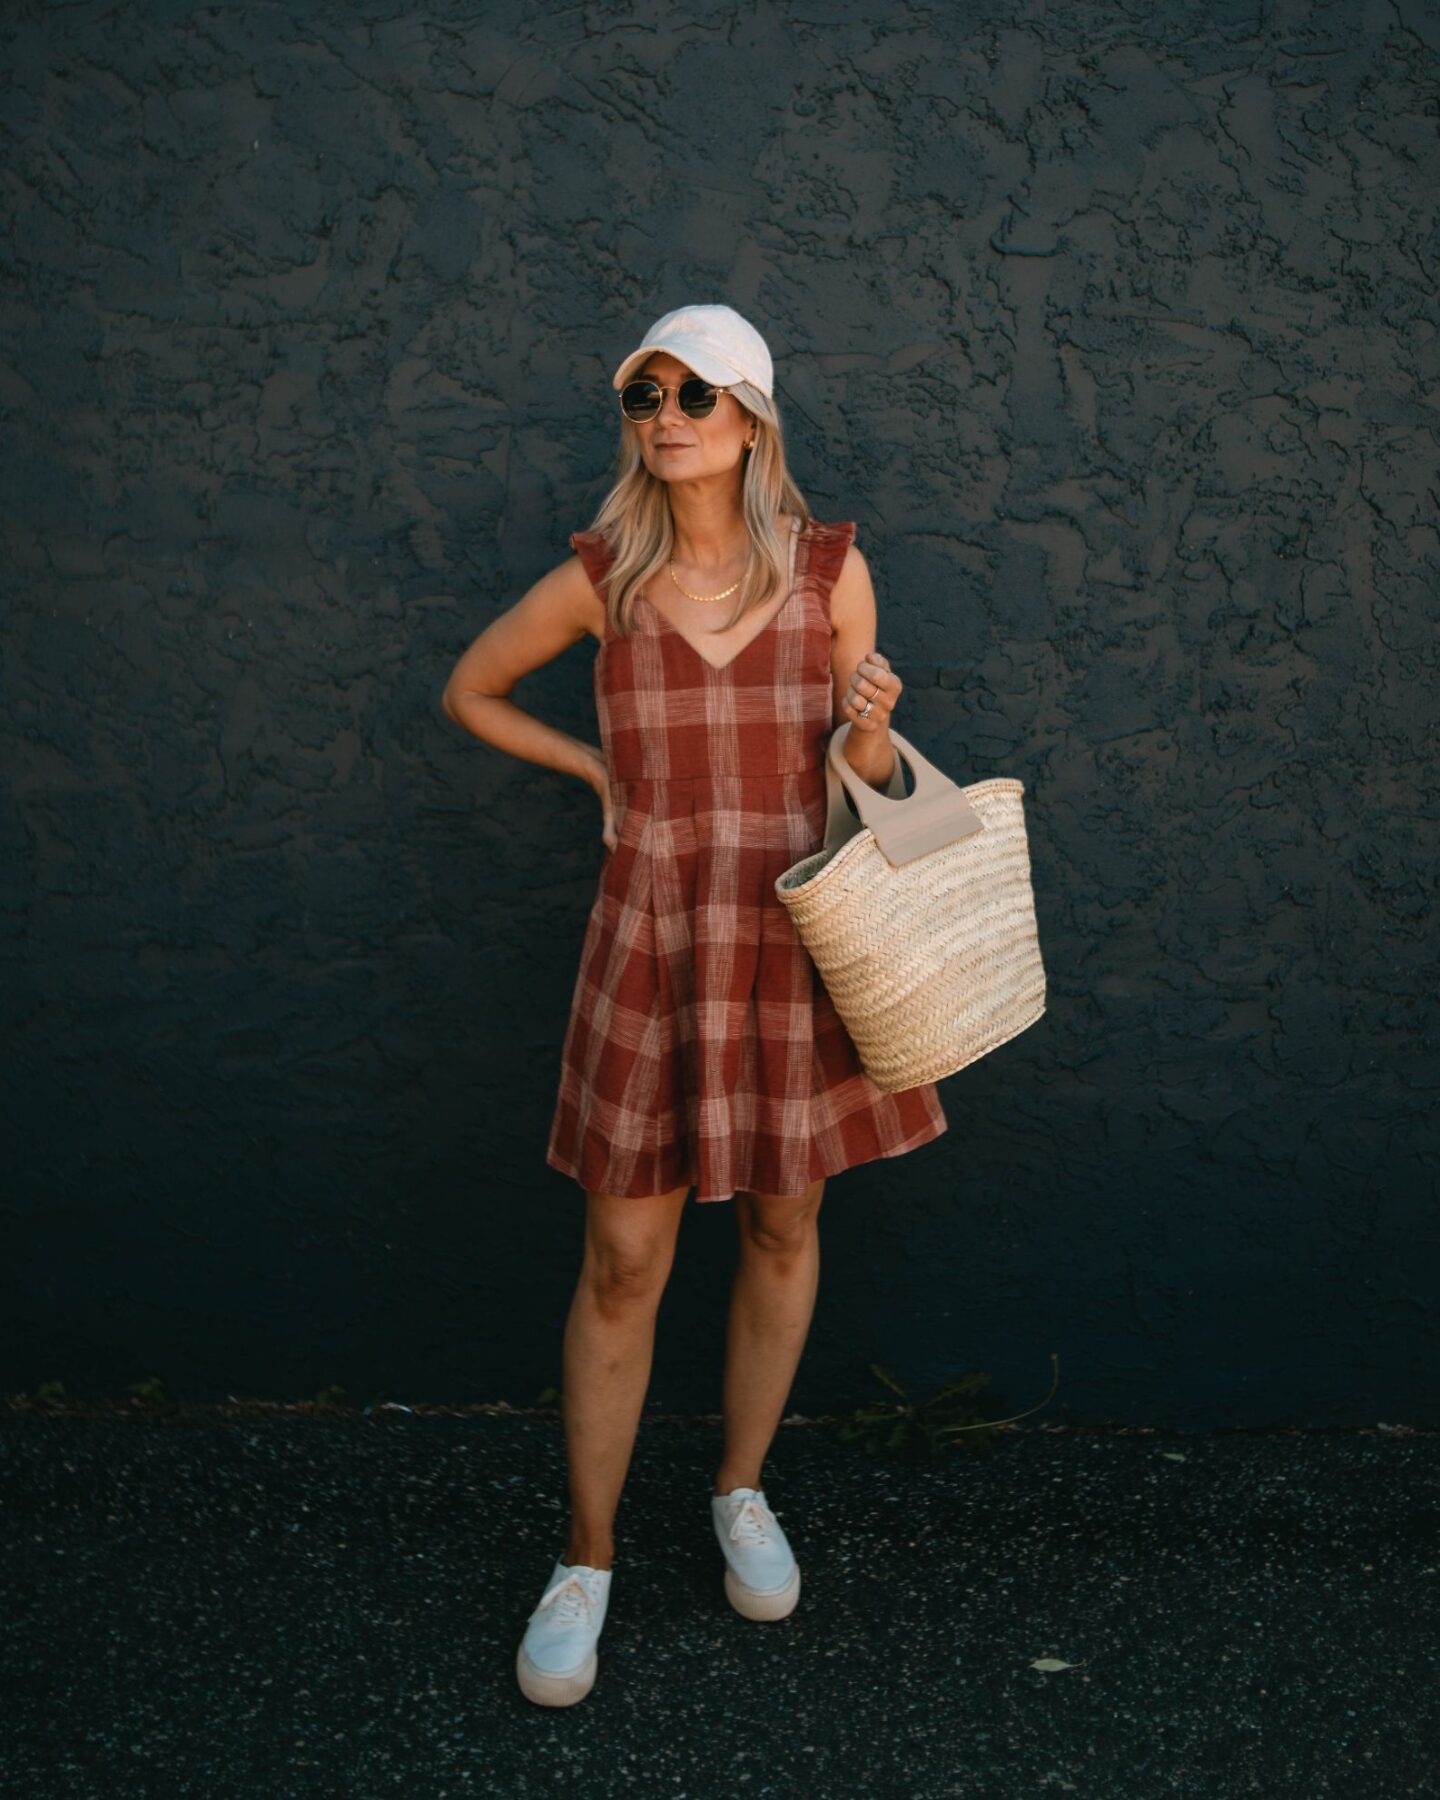 Four 4th of July Outfit Ideas - All Price Points Included!